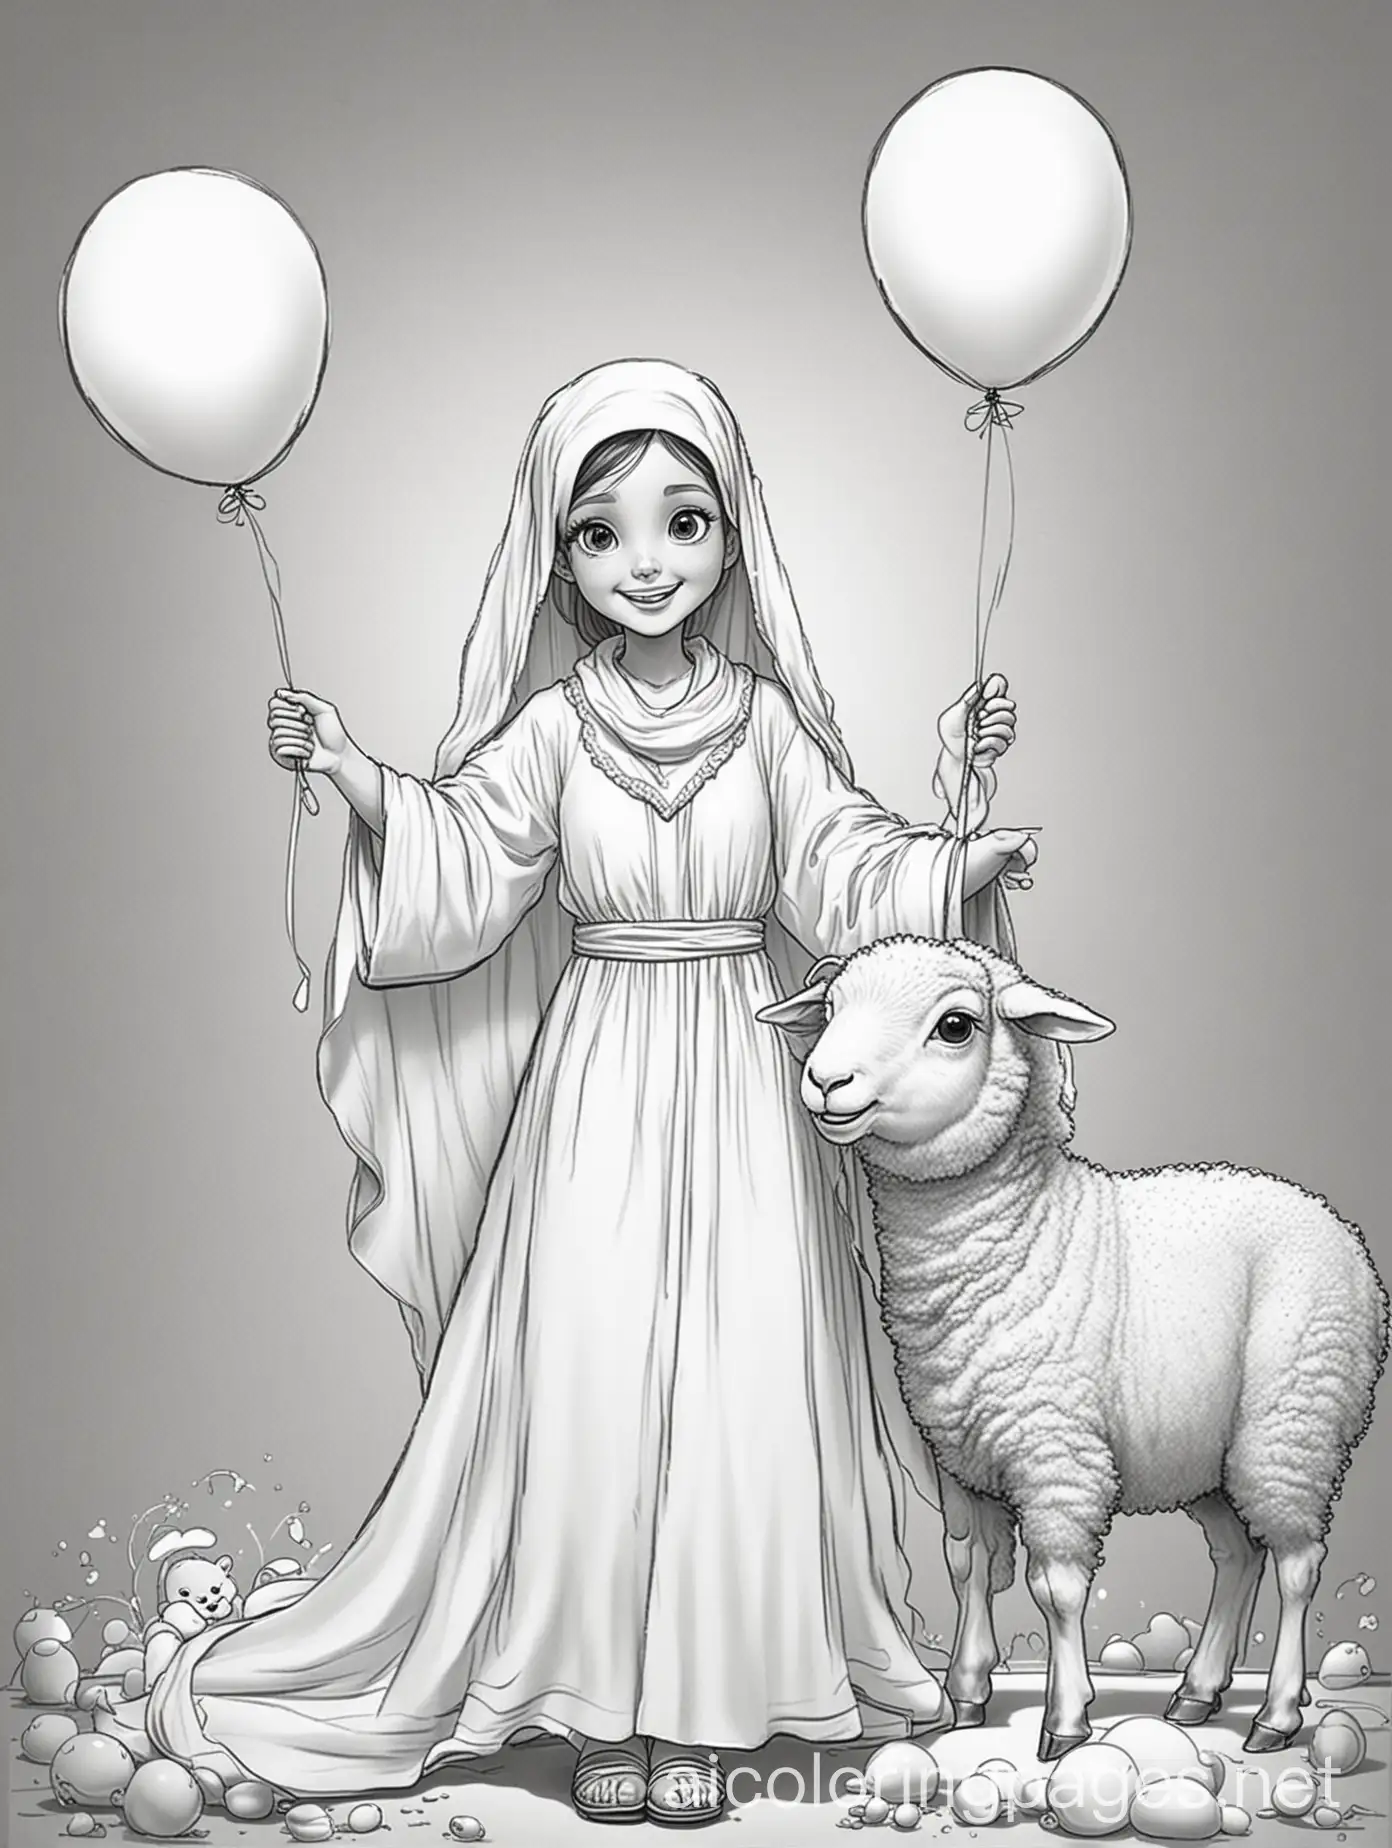 In the cartoon, a veiled girl with a large head appears wearing a wide white robe, and a young man with a large head wears a white robe, which makes his clothes appear large for his size. The girl is smiling and holding a small sheep in his hand, indicating the celebration of Eid. Celebrations, such as holiday decorations and balloons, appear in the background, adding an atmosphere of cheer and joy to the scene. , Coloring Page, black and white, line art, white background, Simplicity, Ample White Space. The background of the coloring page is plain white to make it easy for young children to color within the lines. The outlines of all the subjects are easy to distinguish, making it simple for kids to color without too much difficulty